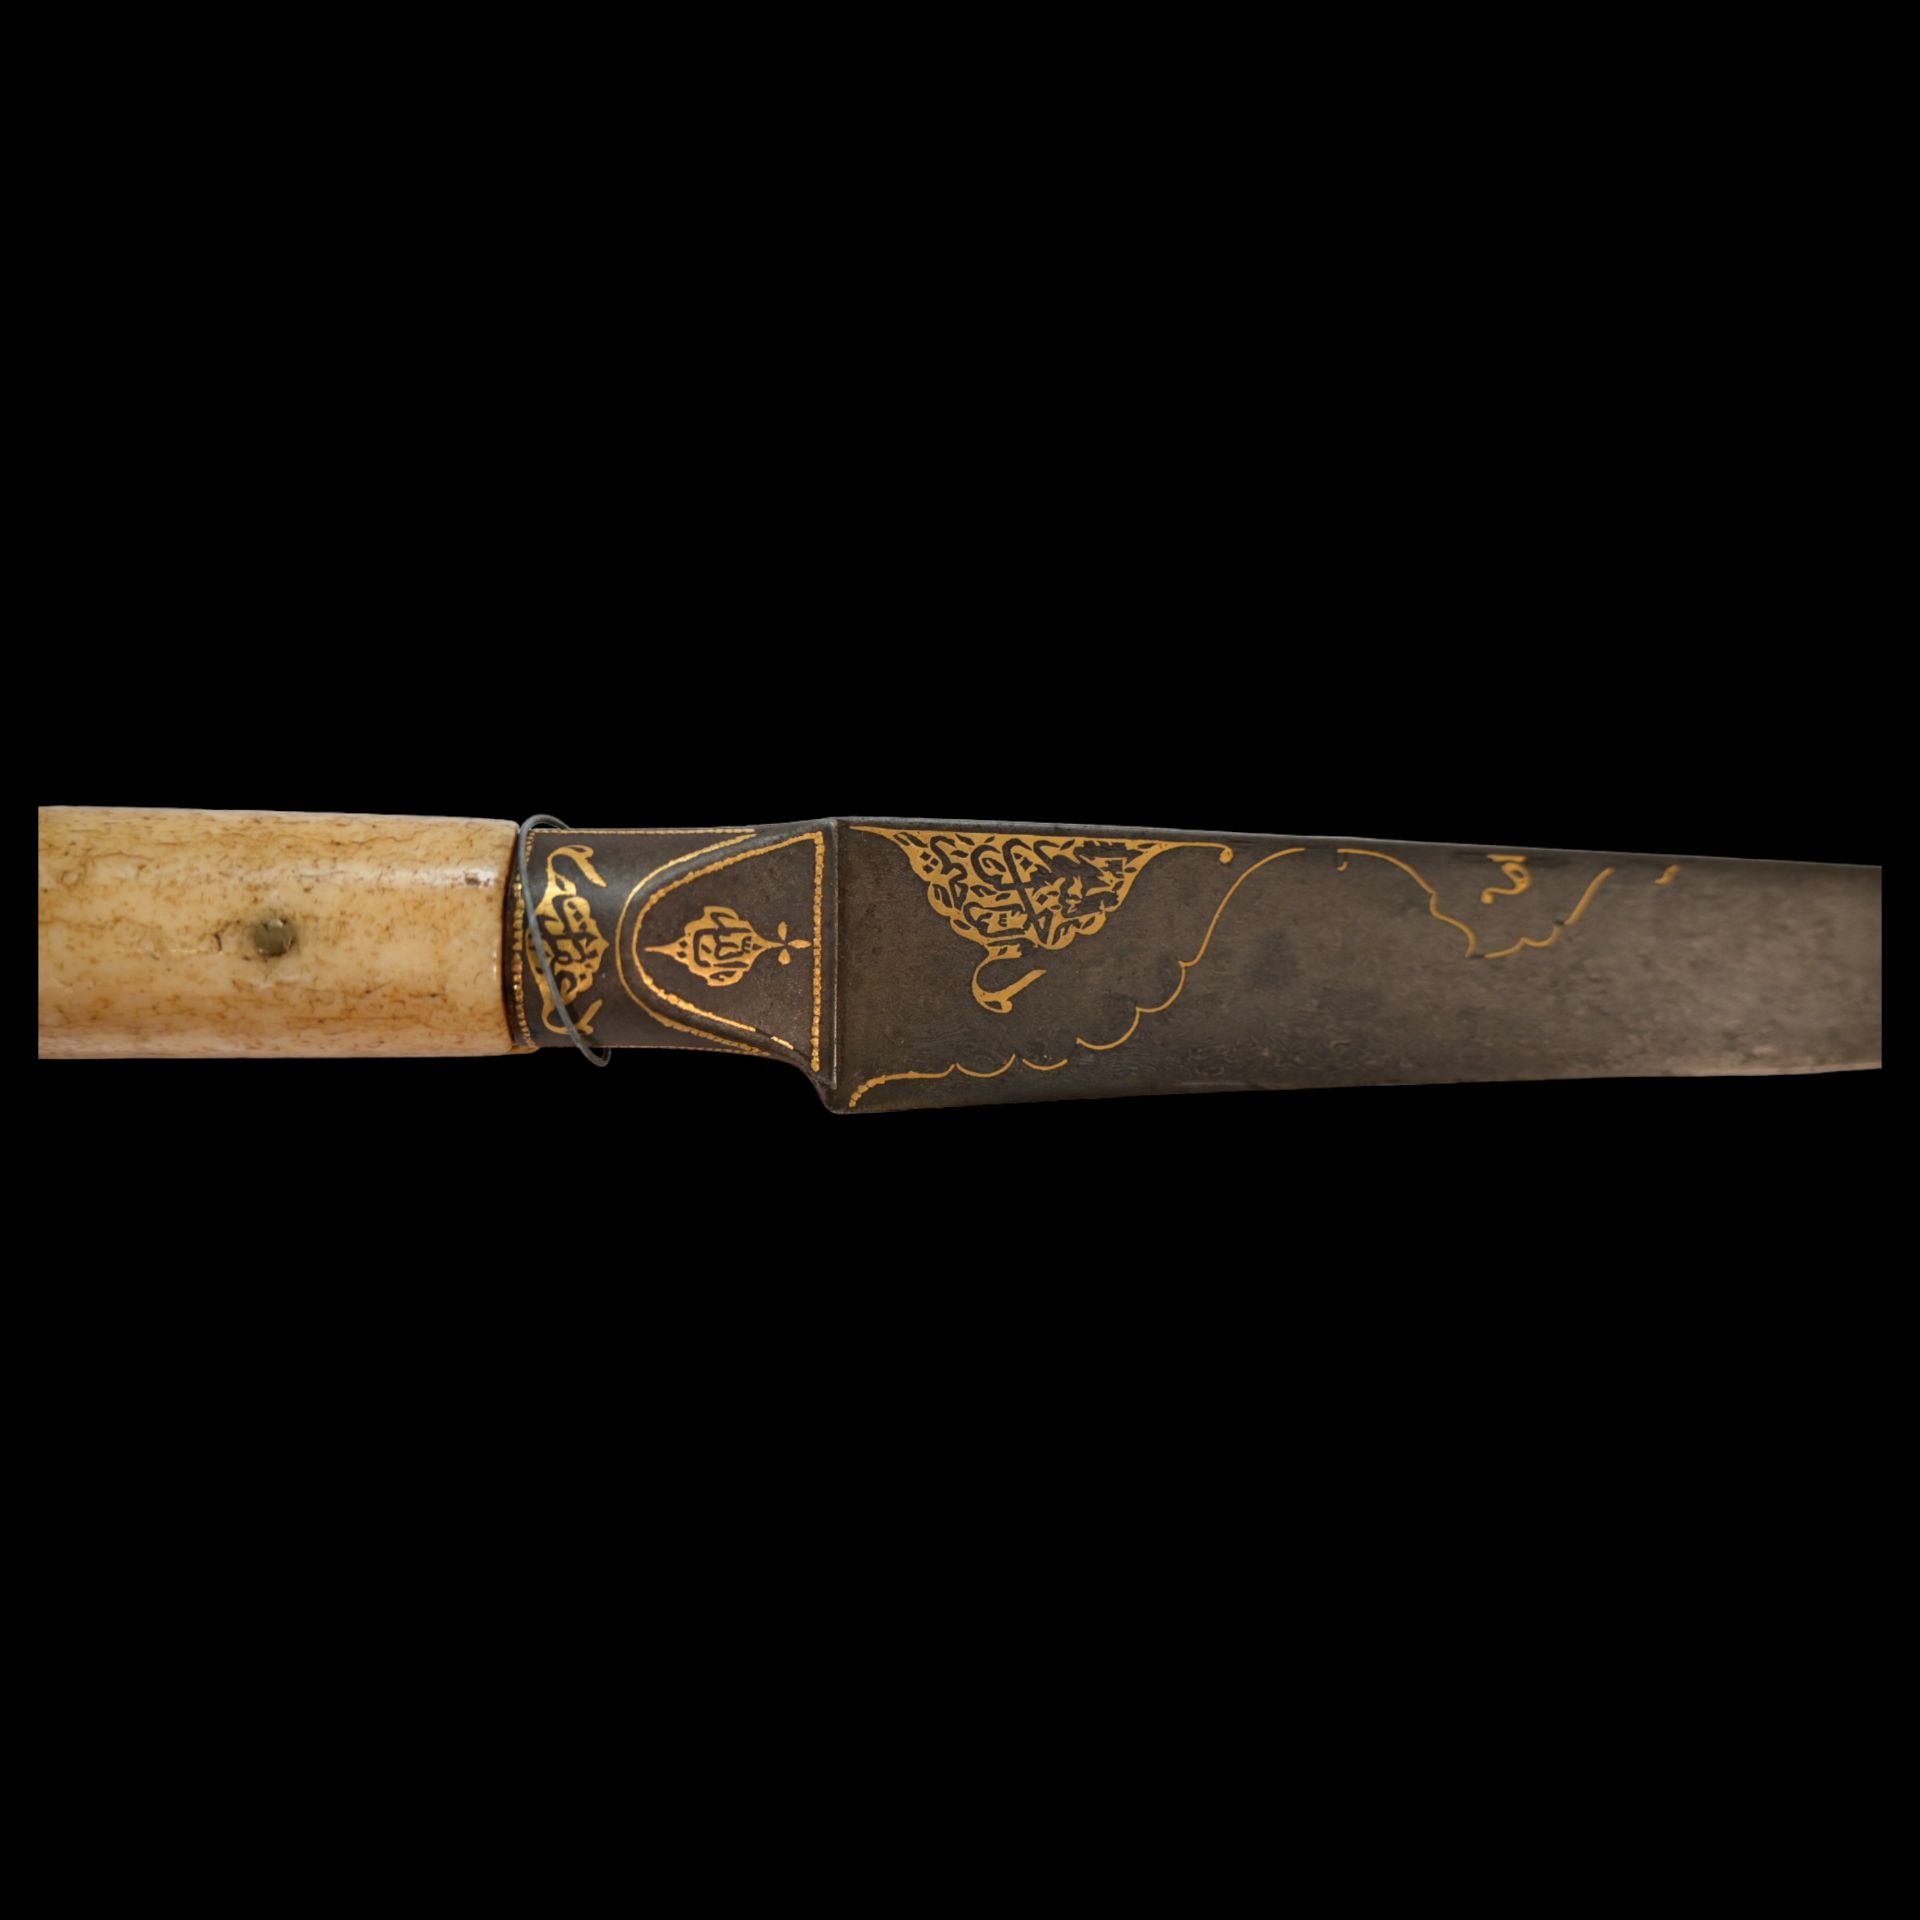 A PERSIAN ZAND DYNASTY KARD DAGGER WITH WOOTZ BLADE AND GOLD INLAY. - Image 25 of 27